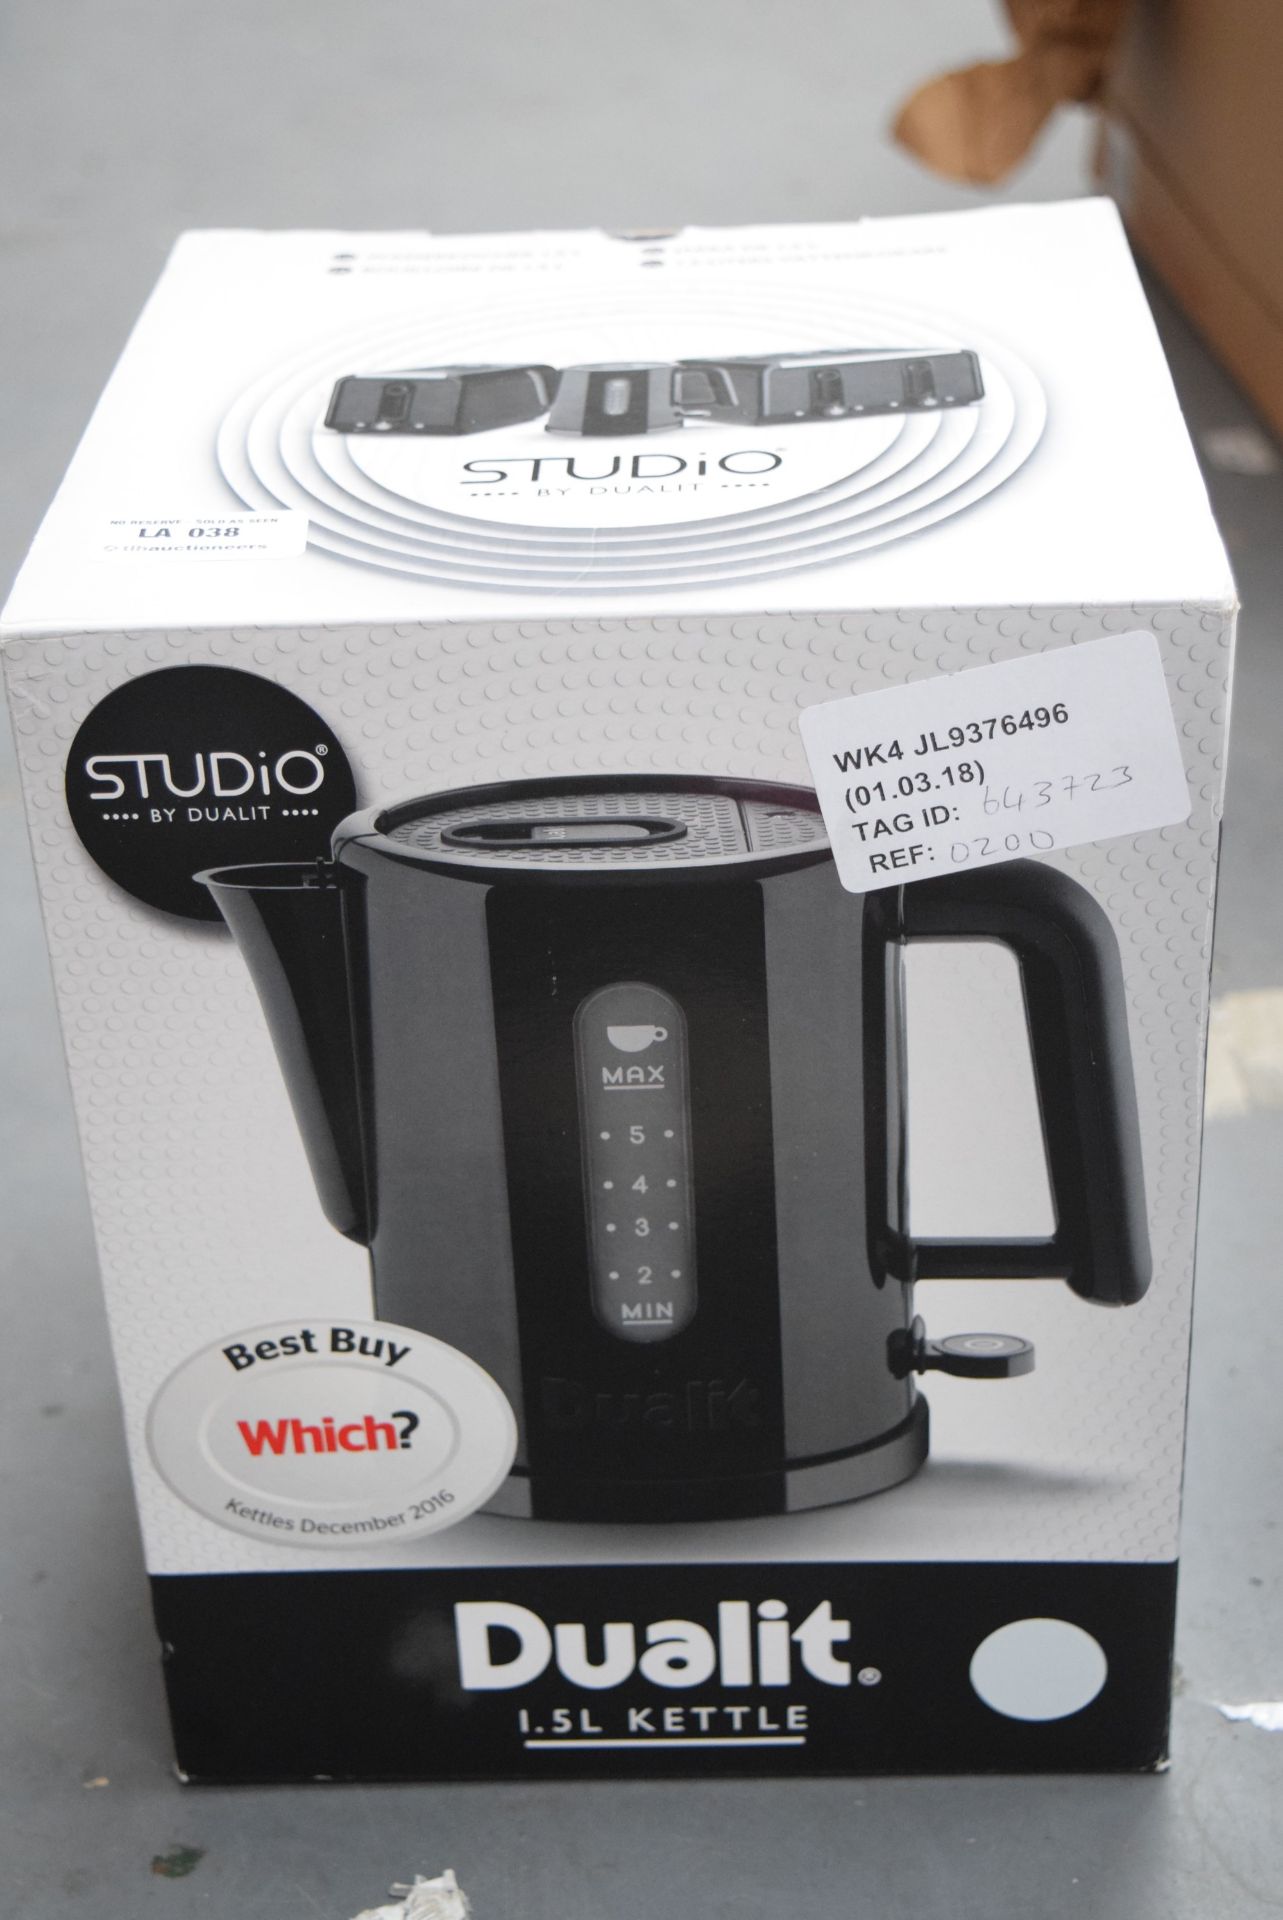 1 x BOXED DUALIT 1.5L KETTLE RRP £35 01.03.18 643723 *PLEASE NOTE THAT THE BID PRICE IS MULTIPLIED